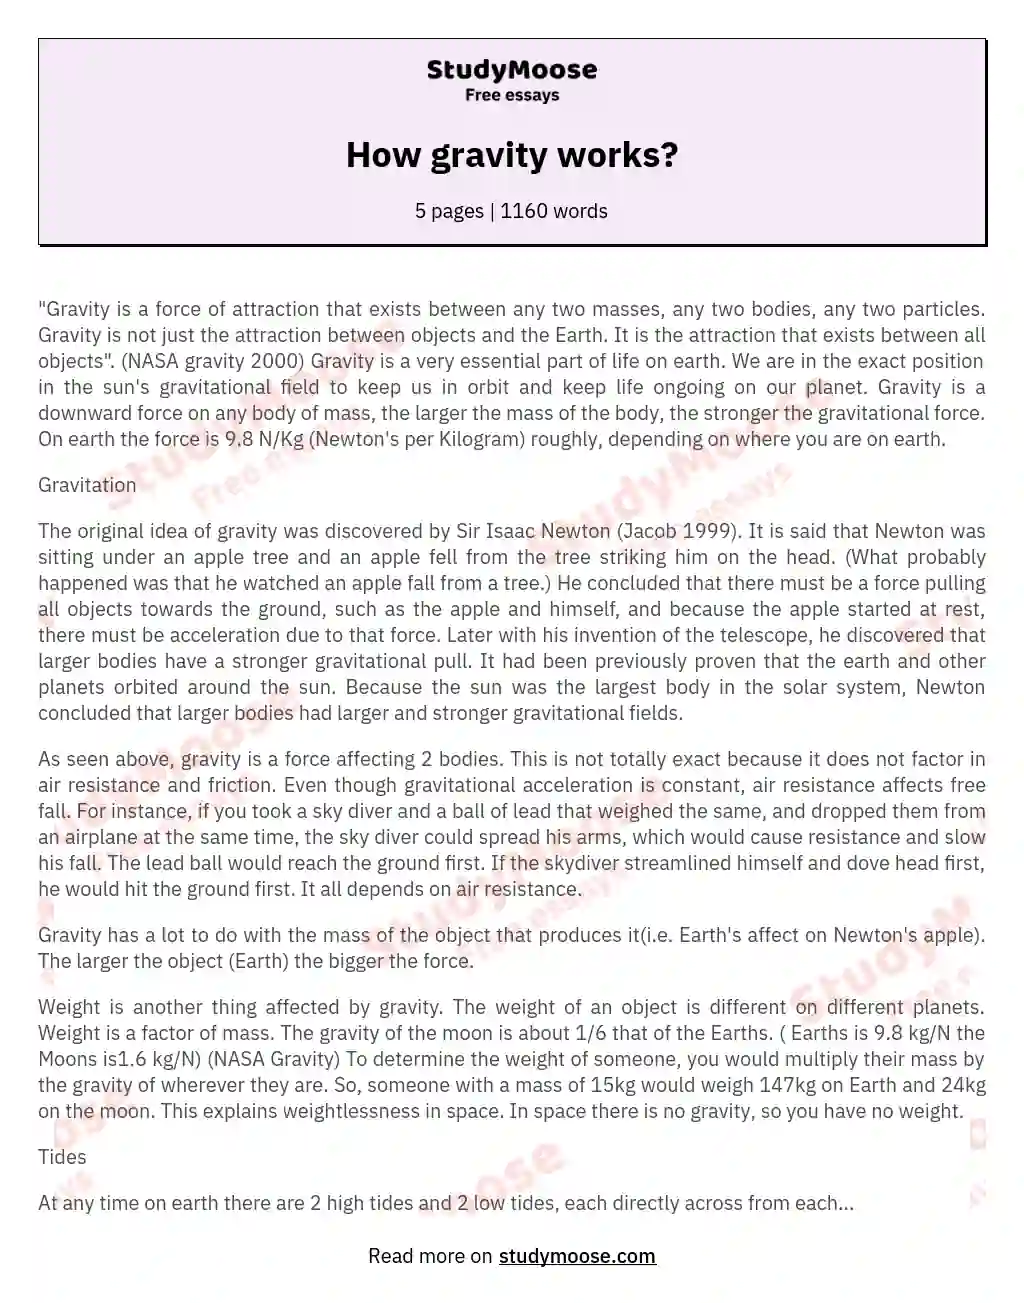 How gravity works? essay